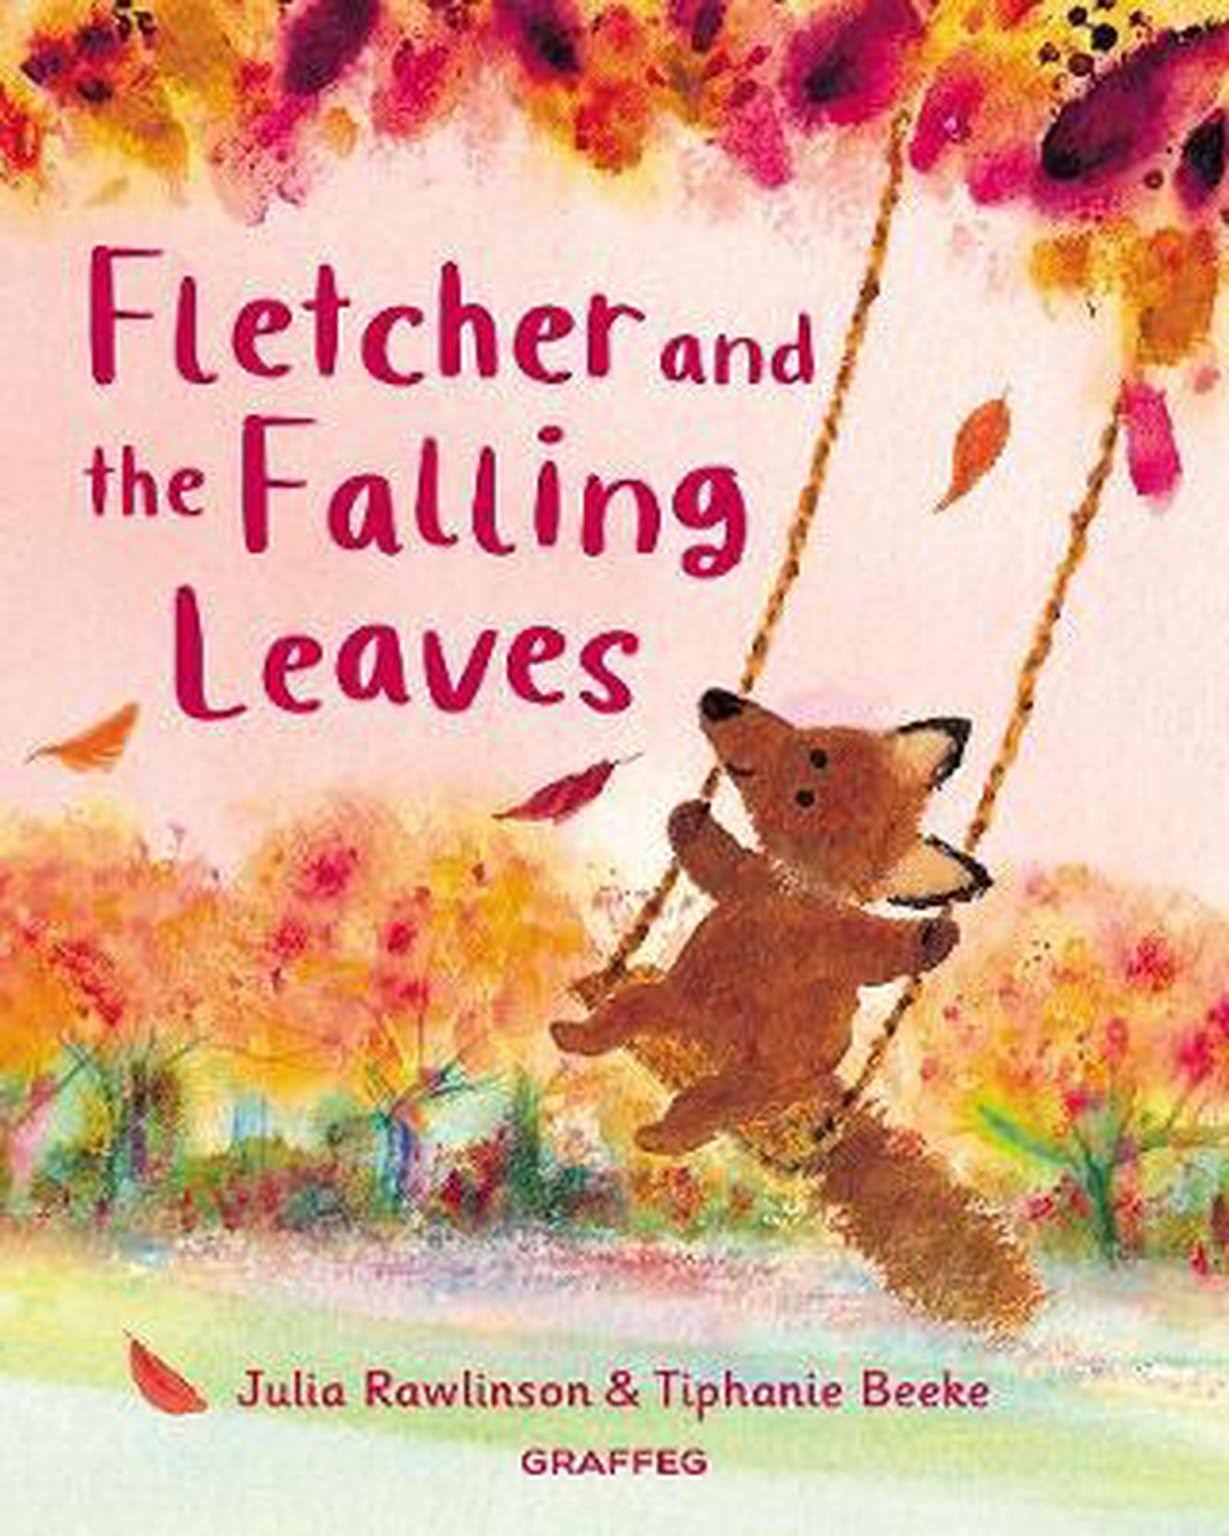 Fletcher and The Falling Autumn Leaves